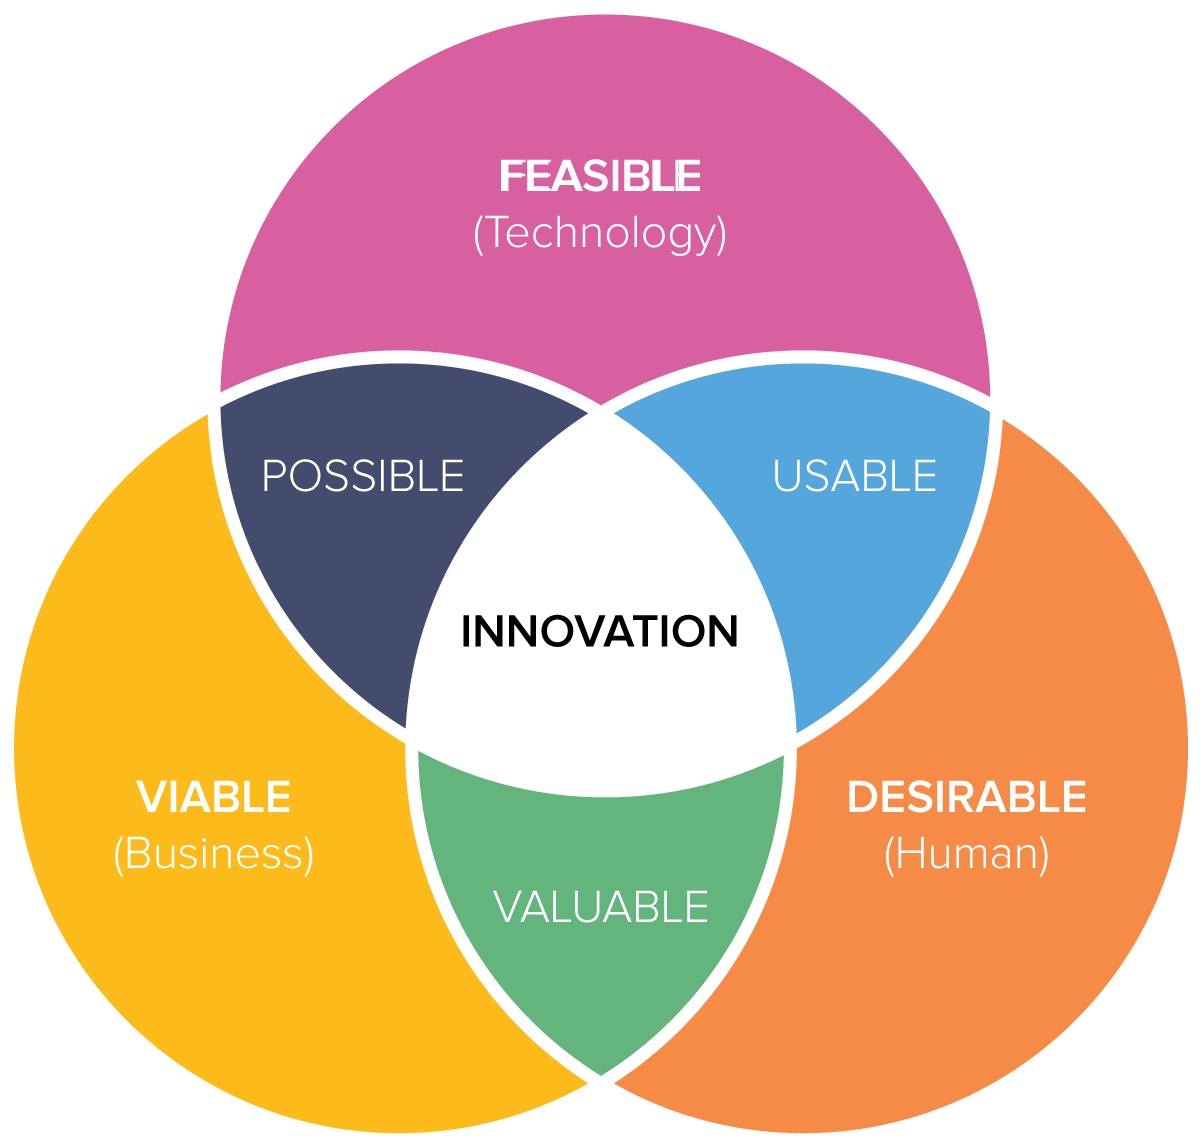 The Venn diagram suggests that three elements must come together to create successful innovation design.